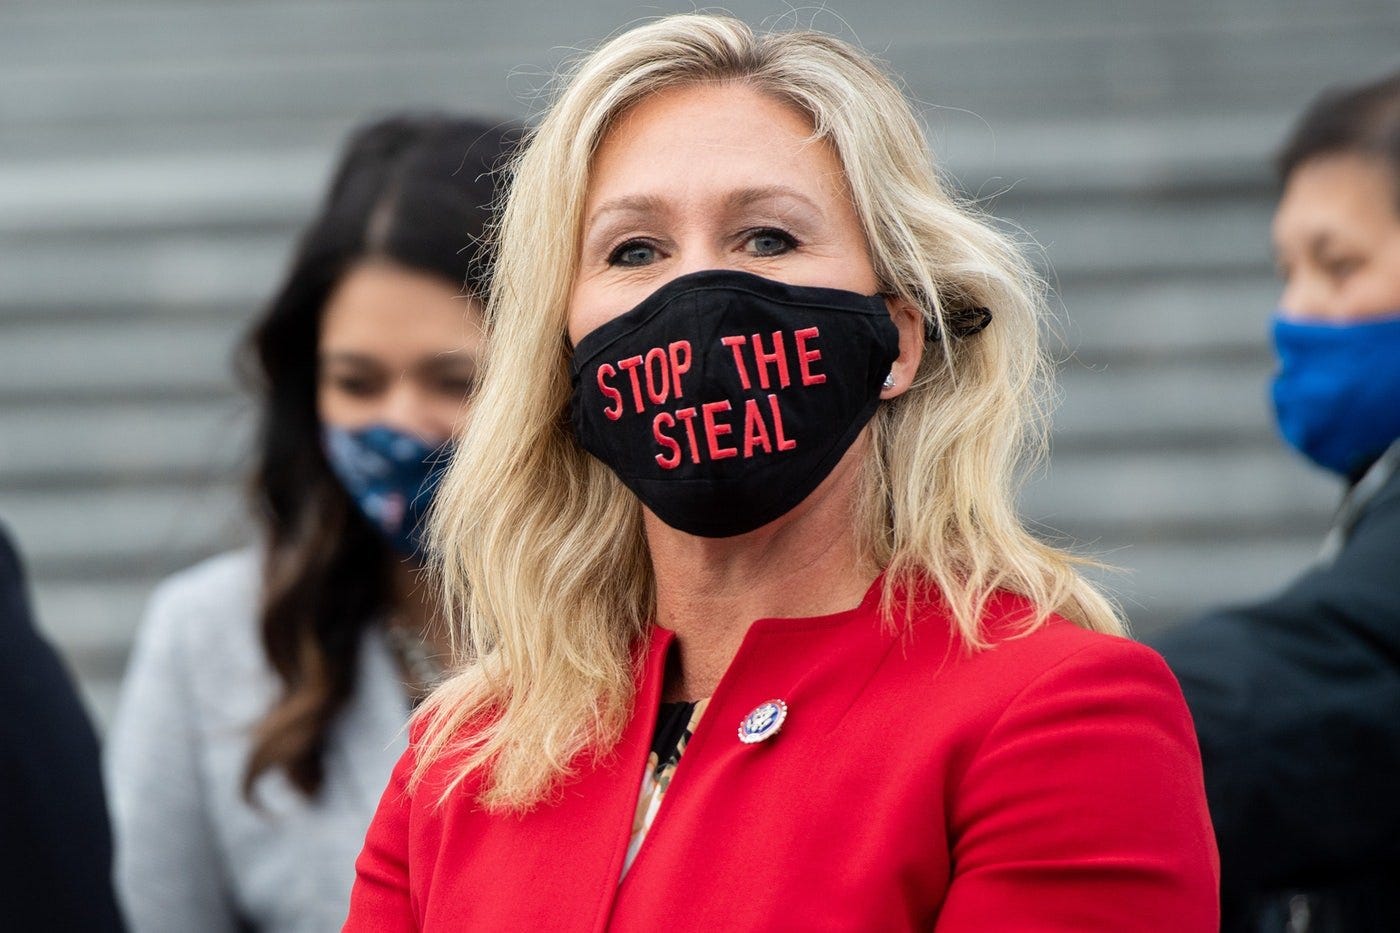 Marjorie Taylor Greene wears a "Stop The Steal" mask.